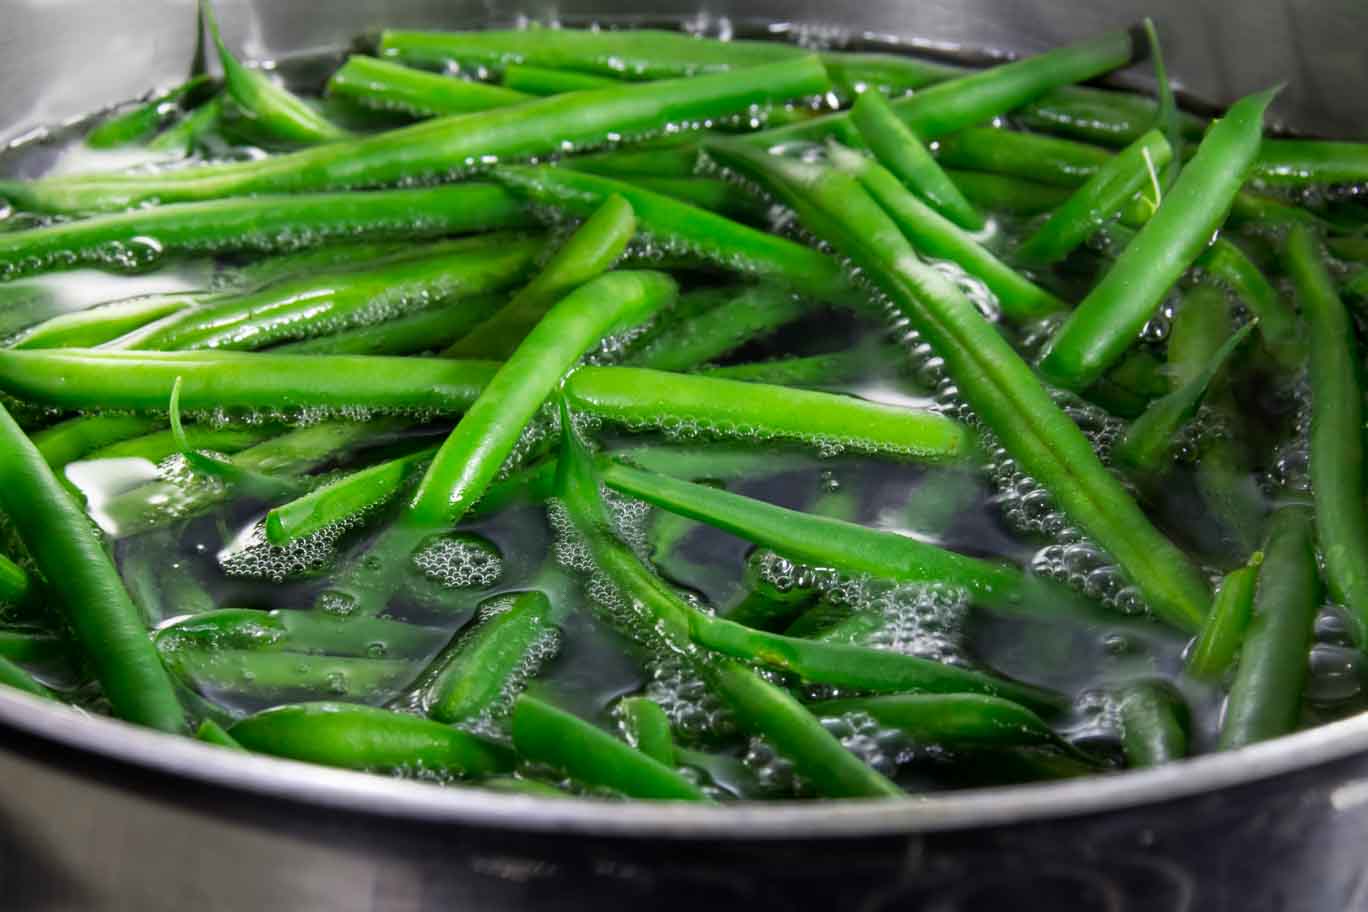 Pot of simmering water with green beans showing how blanching green vegetables keeps the color vibrant green.